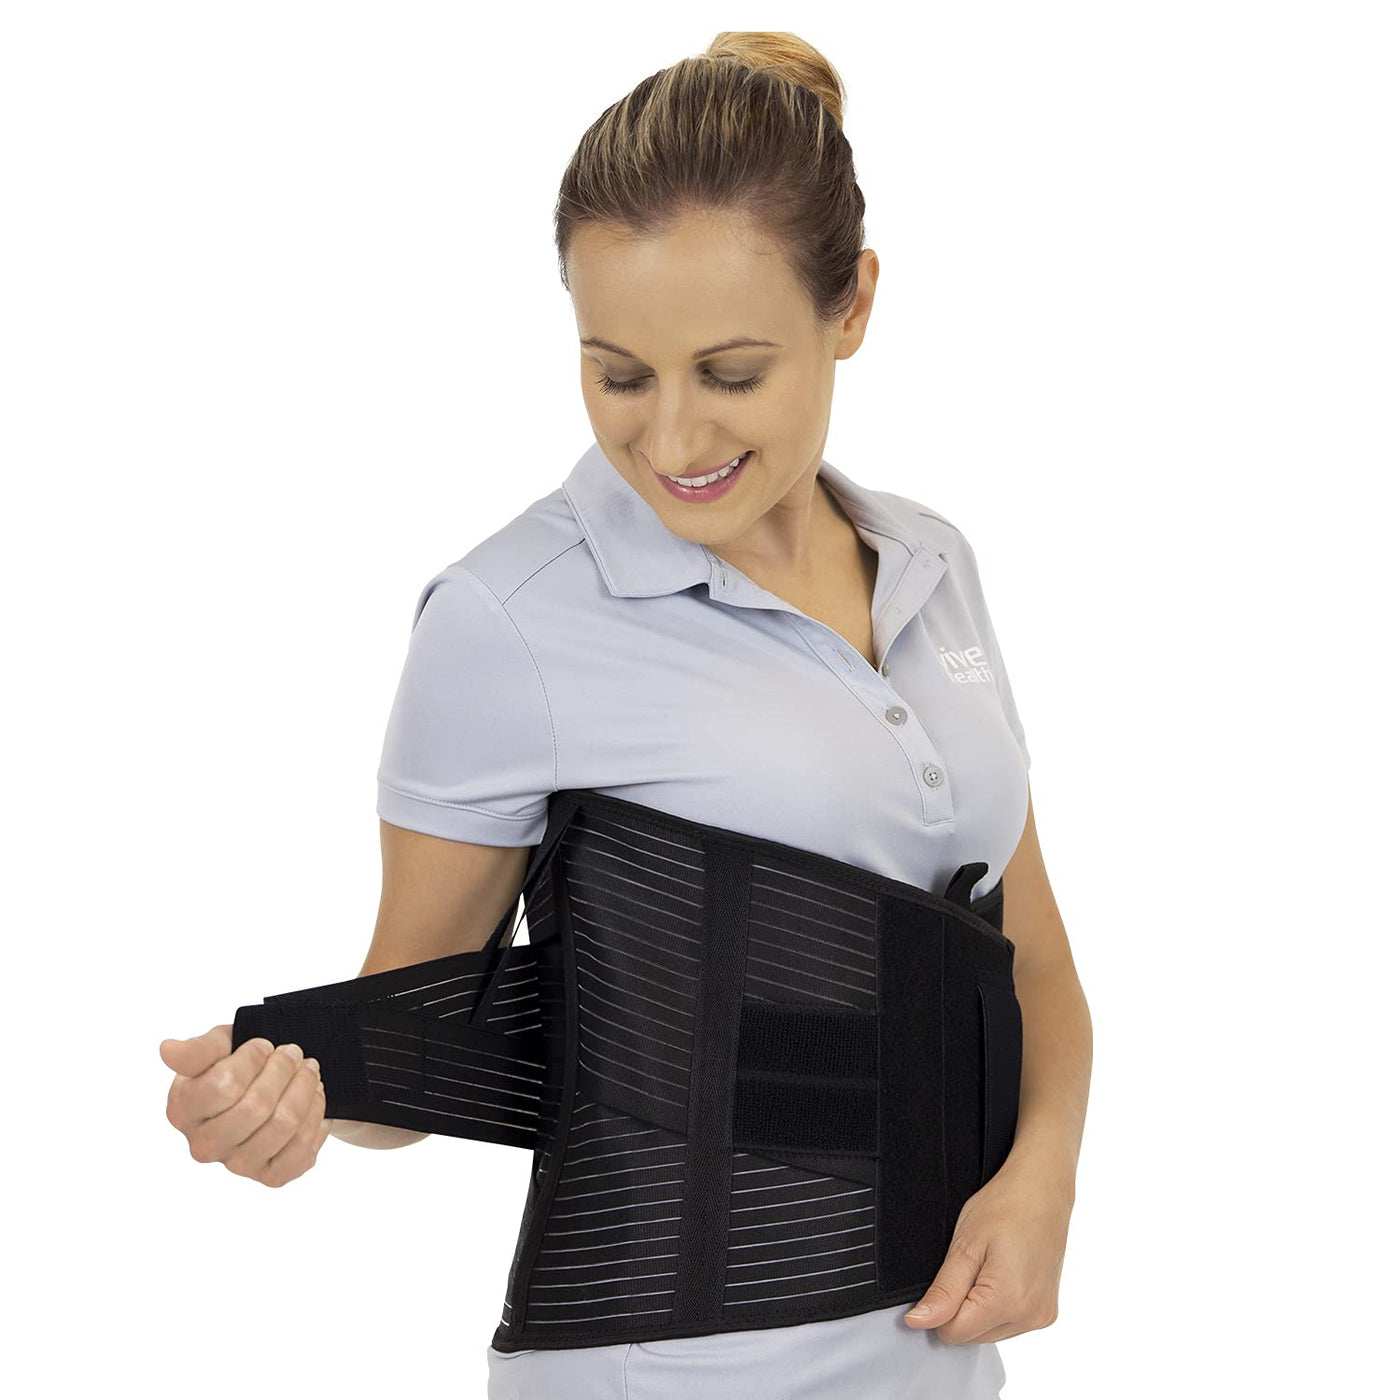 Vive Lower Back Brace for Women & Men with Cross Strap Support - Posture  Corrector Back Support Belt for Herniated Disc, Scoliosis, Sciatica Pain  Relief, & Spine Decompression - Small, Medium, Large 